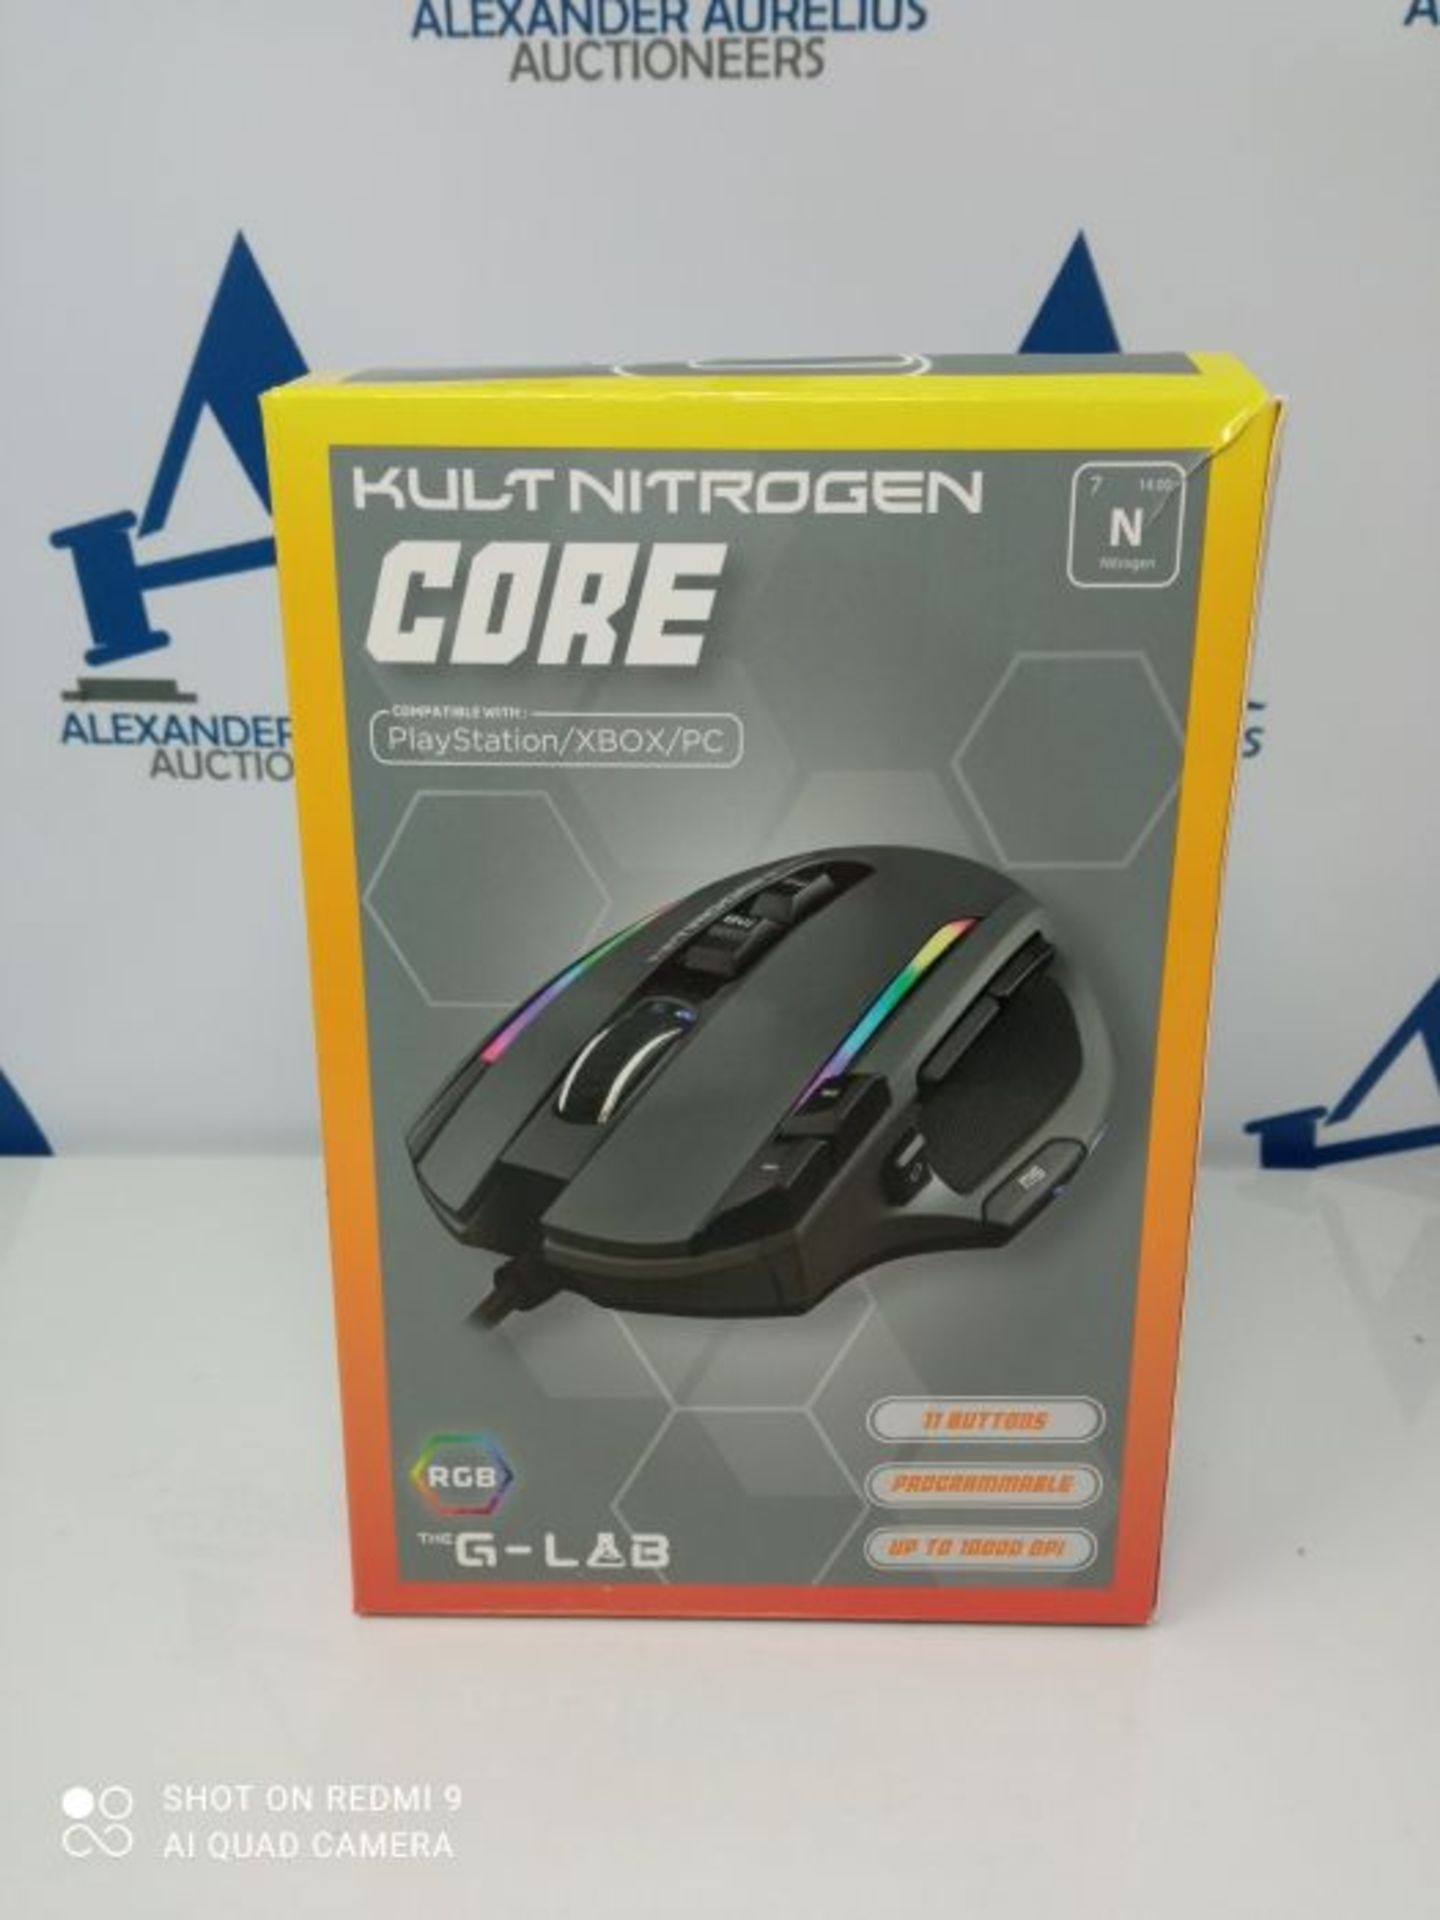 G-LAB Kult NITROGEN Core High Performance Wired Gaming Mouse - Avago 10,000 DPI Optica - Image 2 of 3